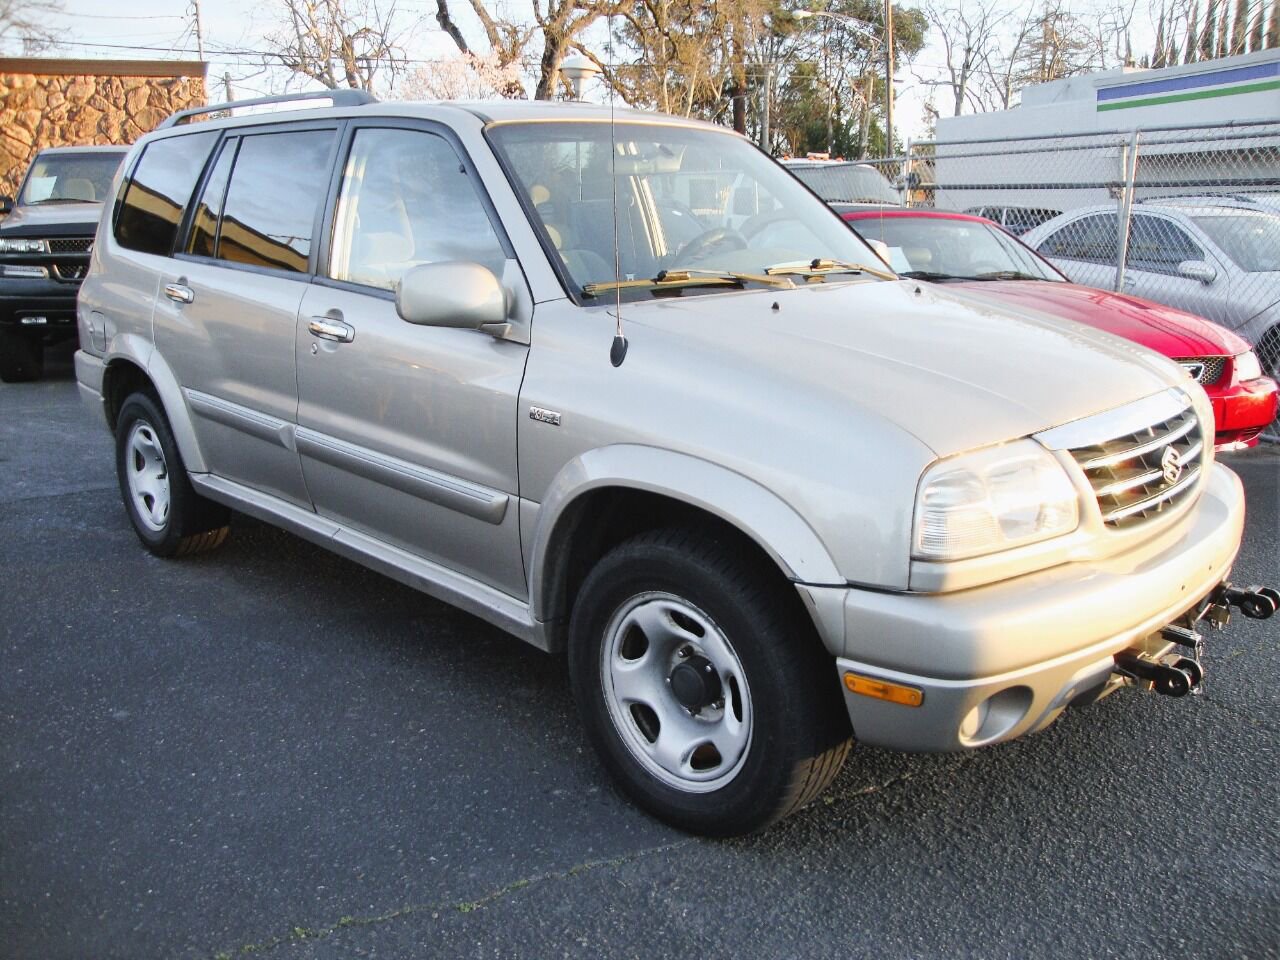 Used 2002 Suzuki XL7 for Sale Right Now - Autotrader